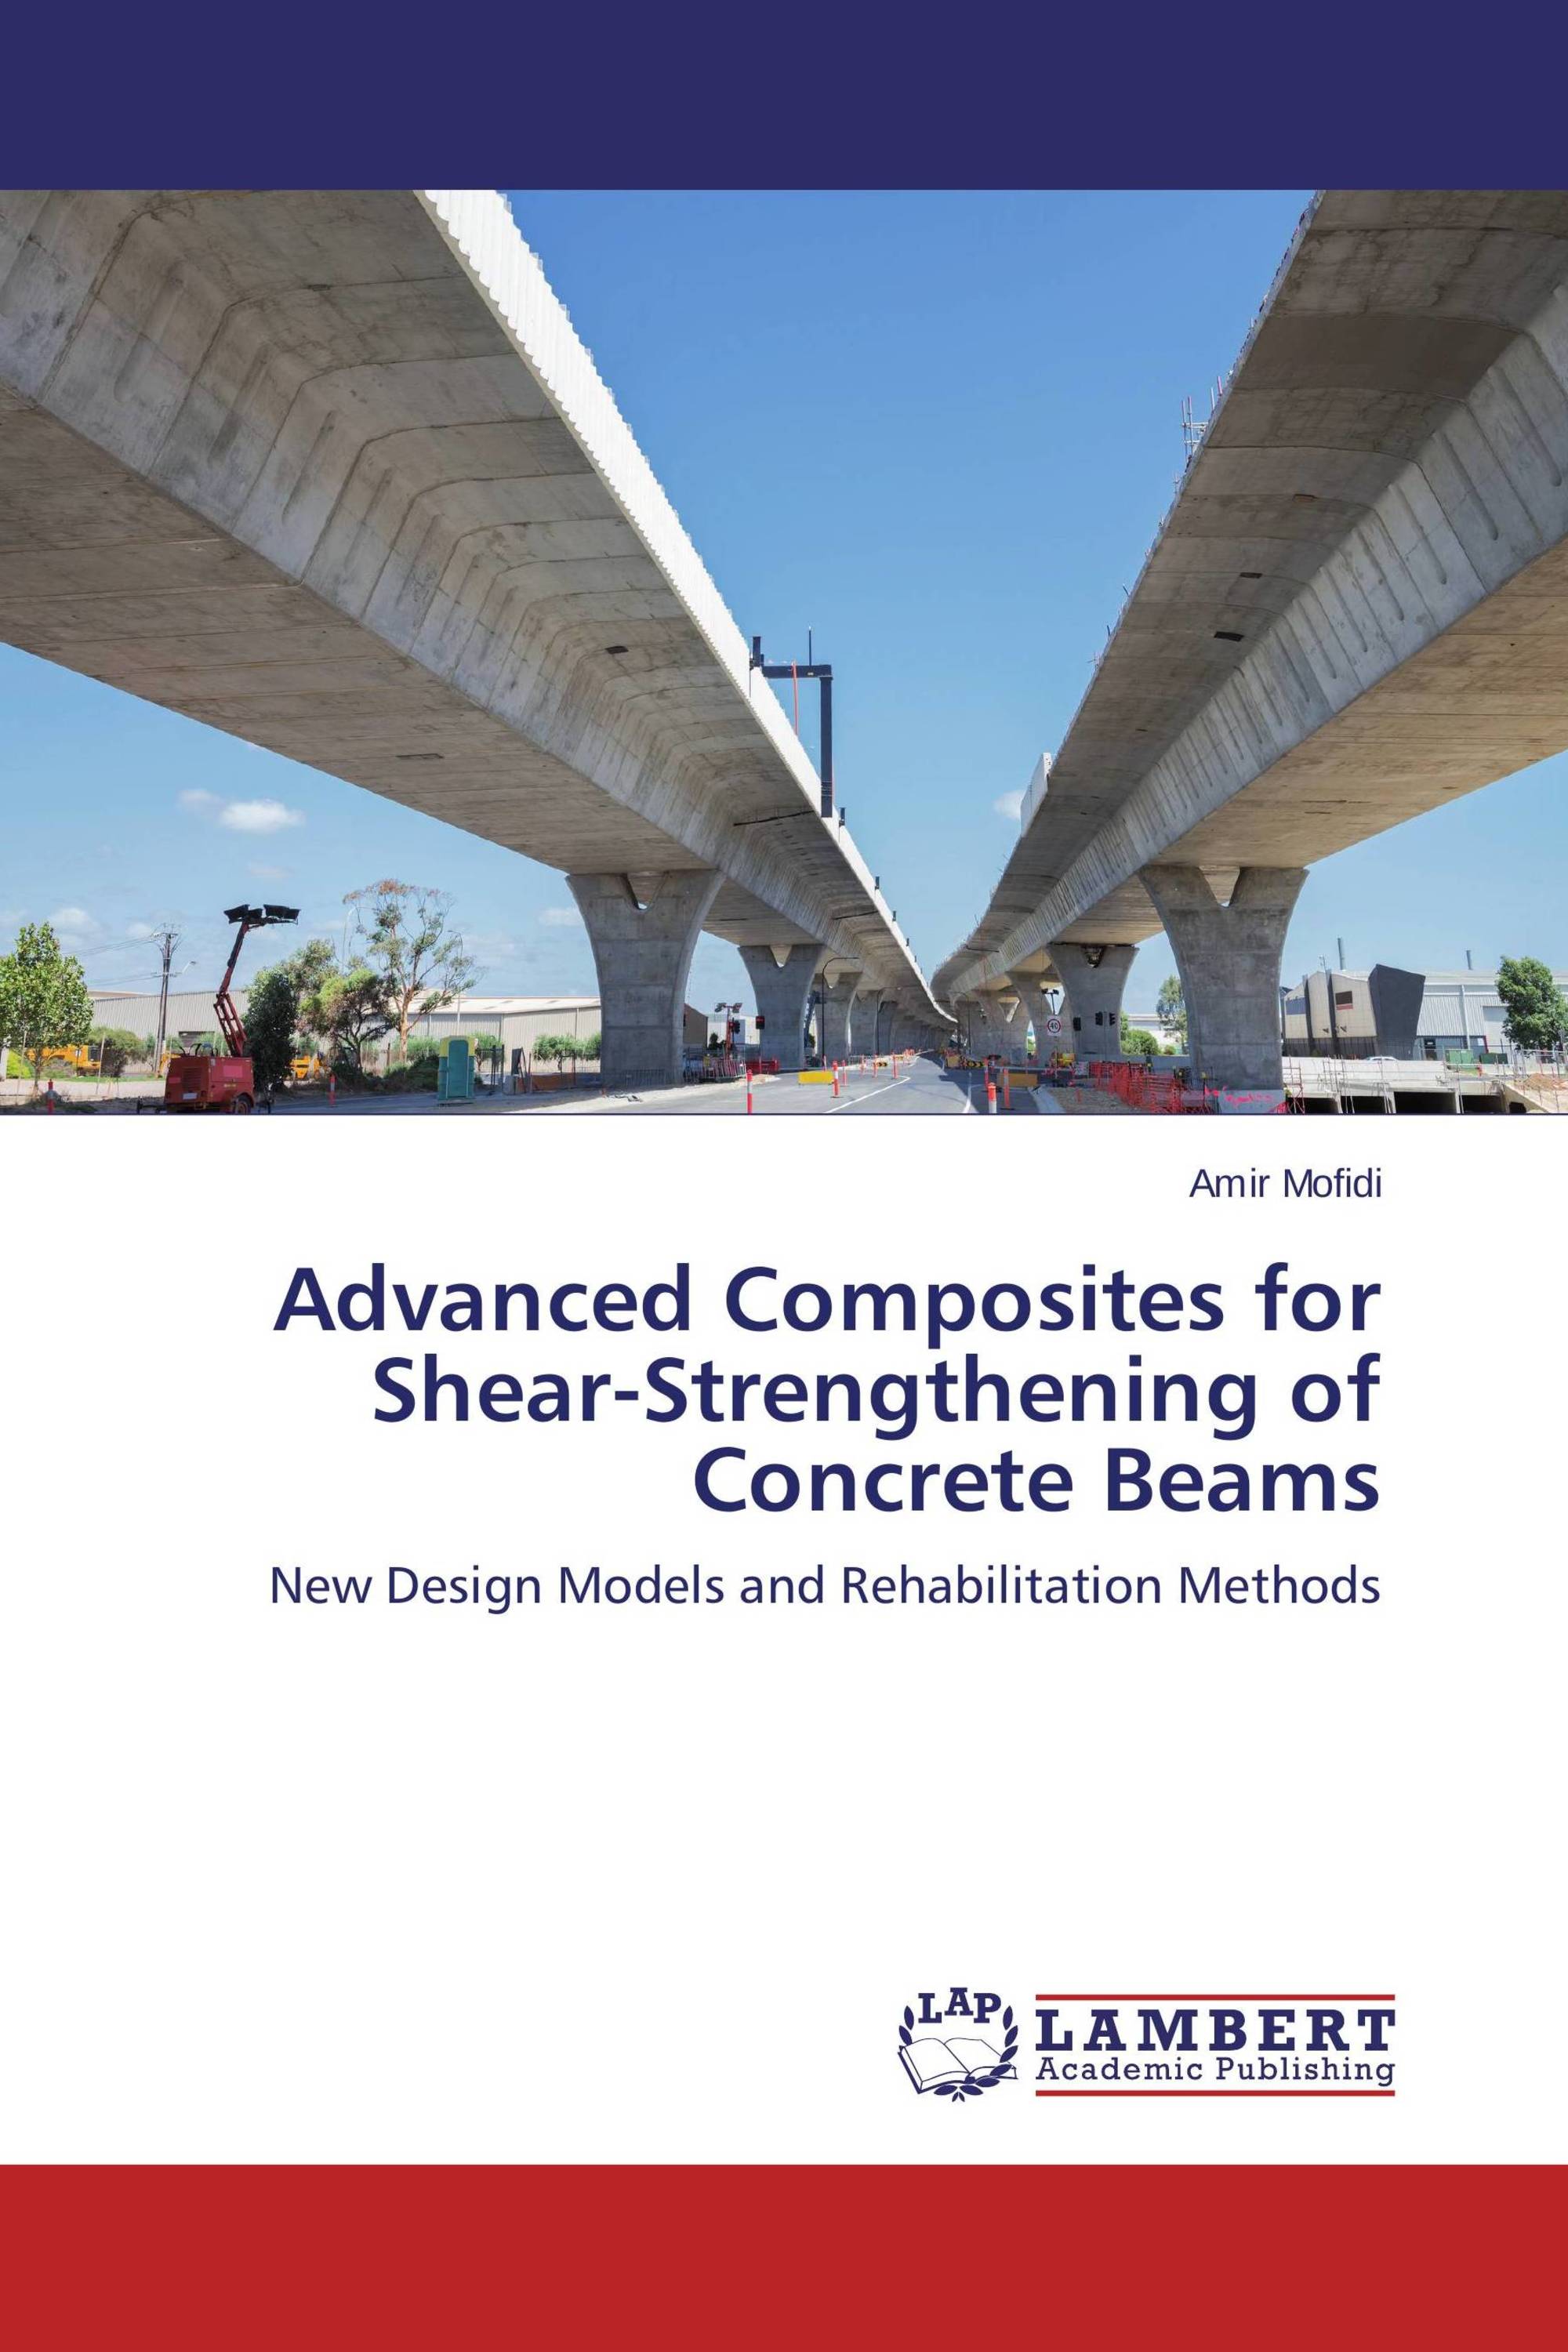 Advanced Composites for Shear-Strengthening of Concrete Beams